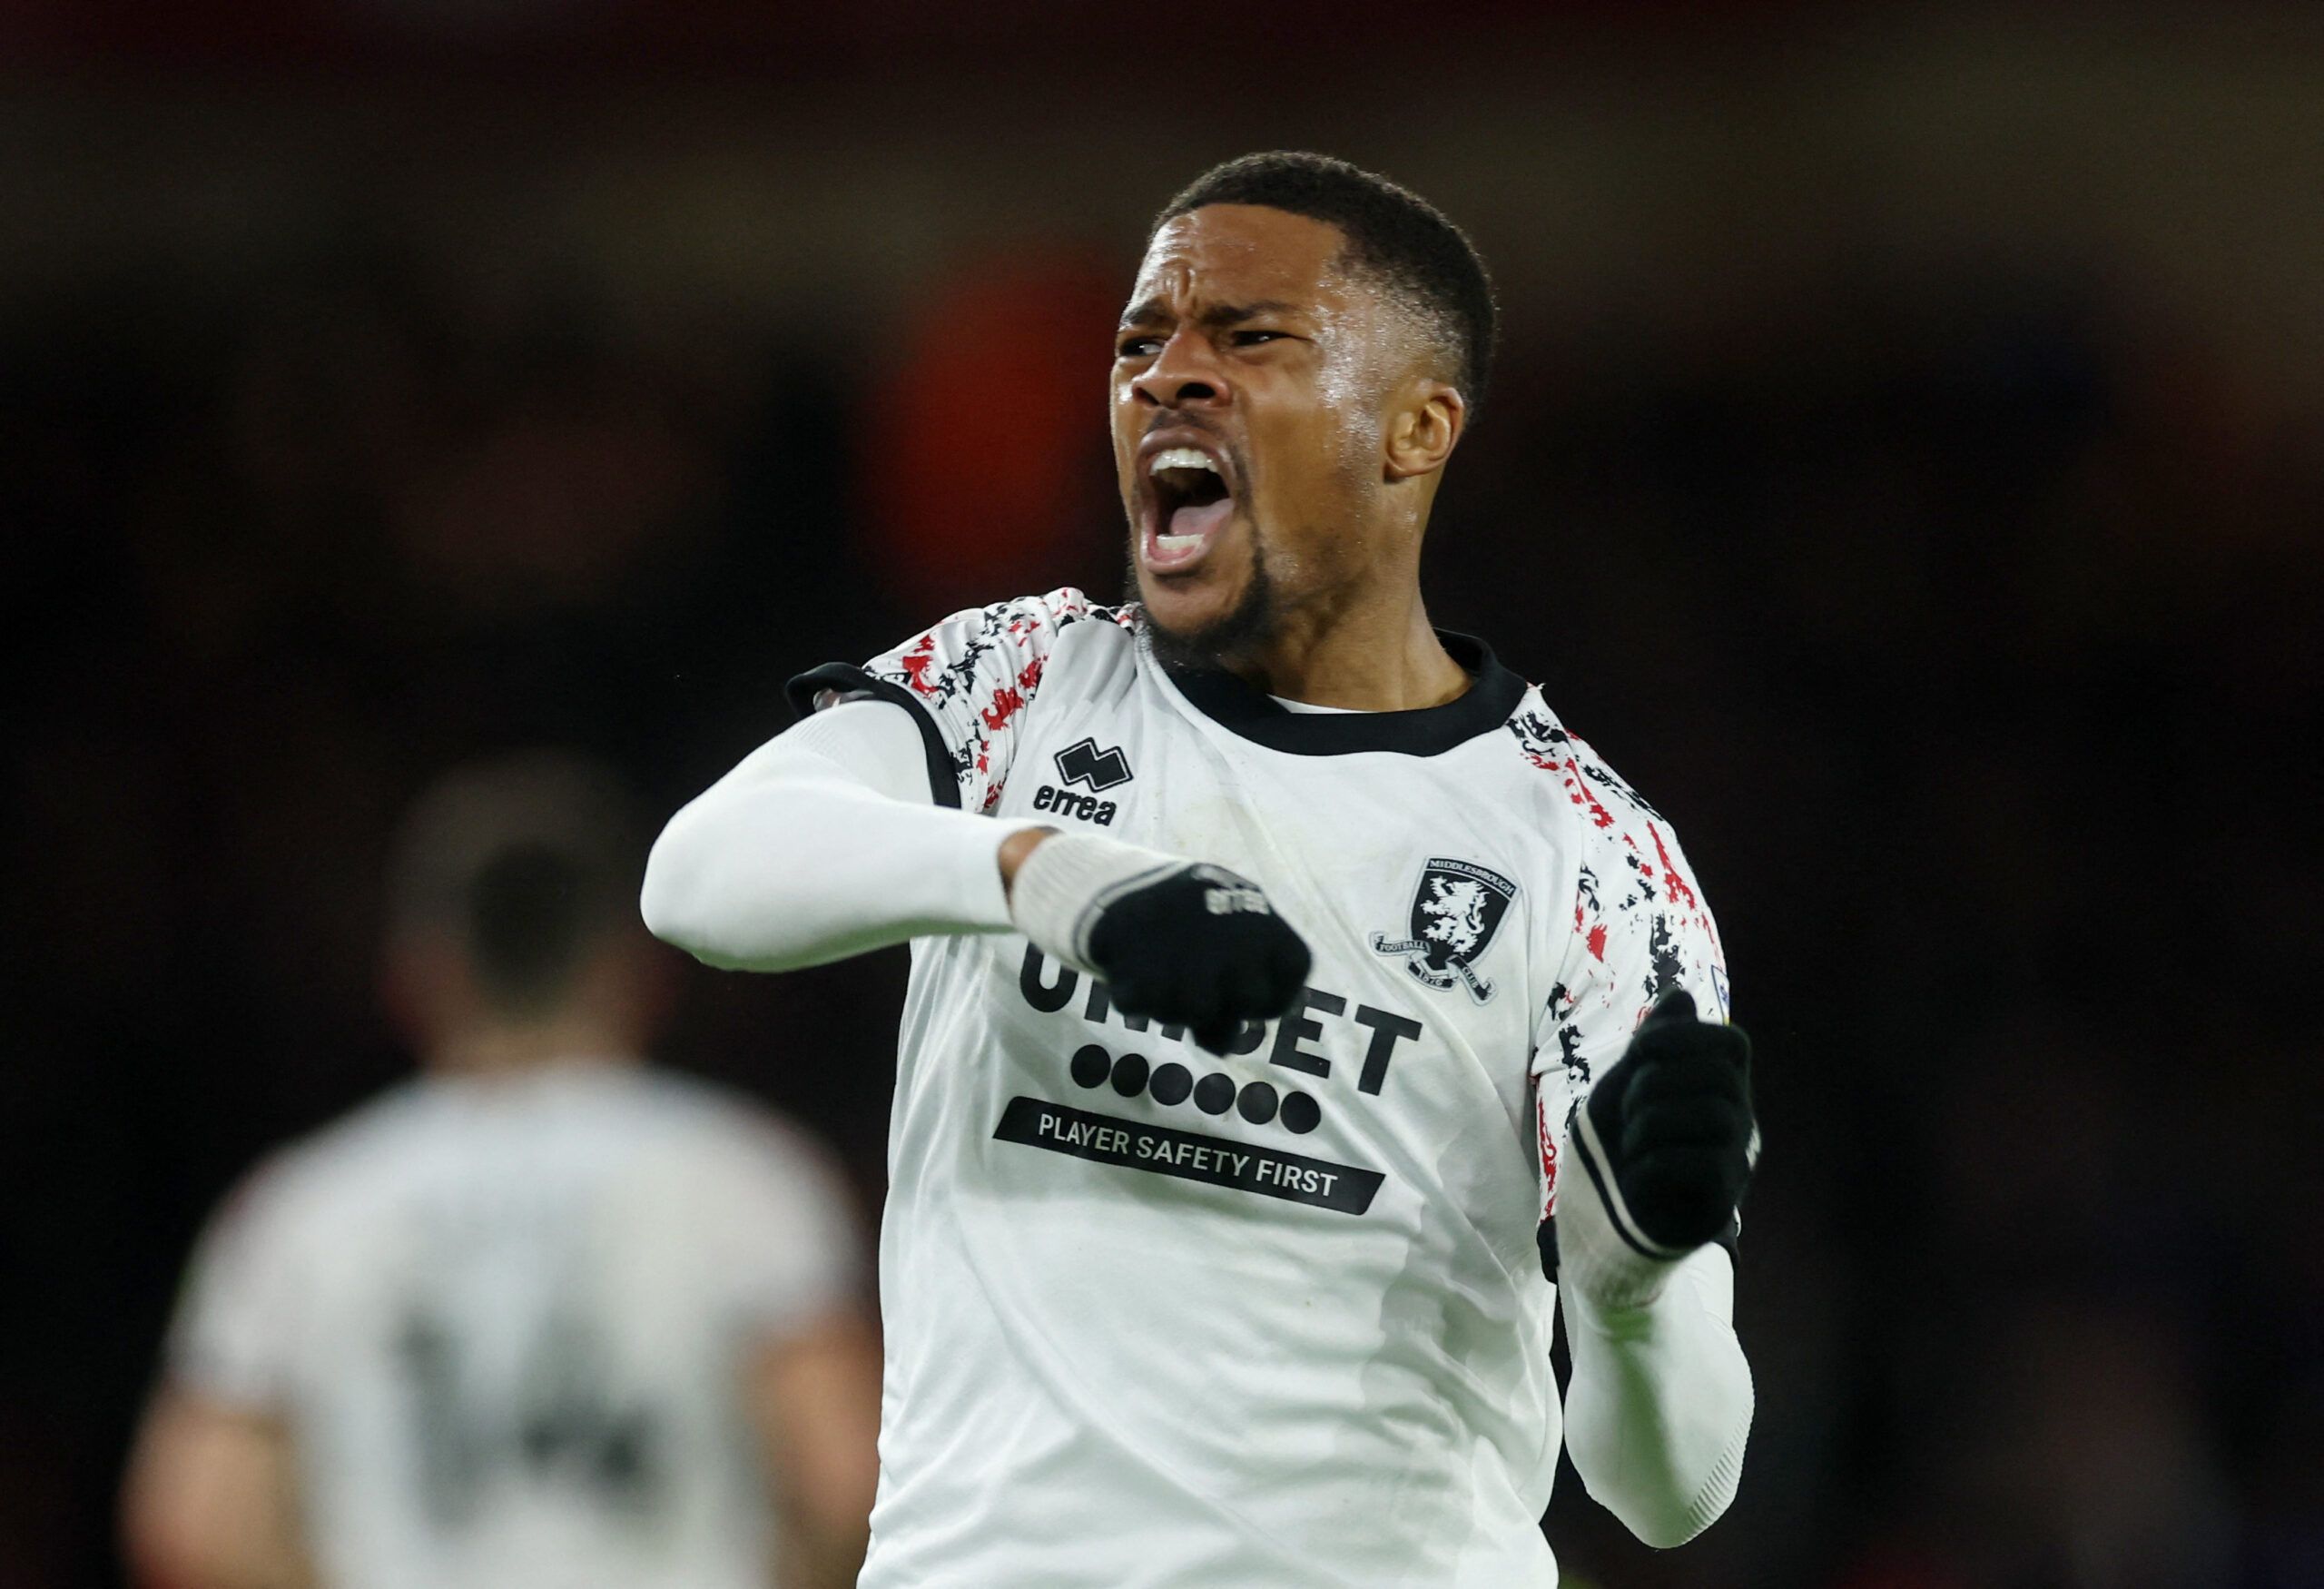 Soccer Football - Championship - Sheffield United v Middlesbrough - Bramall Lane, Sheffield, Britain - February 15, 2023 Middlesbrough's Chuba Akpom celebrates scoring their first goal Action Images/Lee Smith EDITORIAL USE ONLY. No use with unauthorized audio, video, data, fixture lists, club/league logos or 'live' services. Online in-match use limited to 75 images, no video emulation. No use in betting, games or single club /league/player publications.  Please contact your account representativ